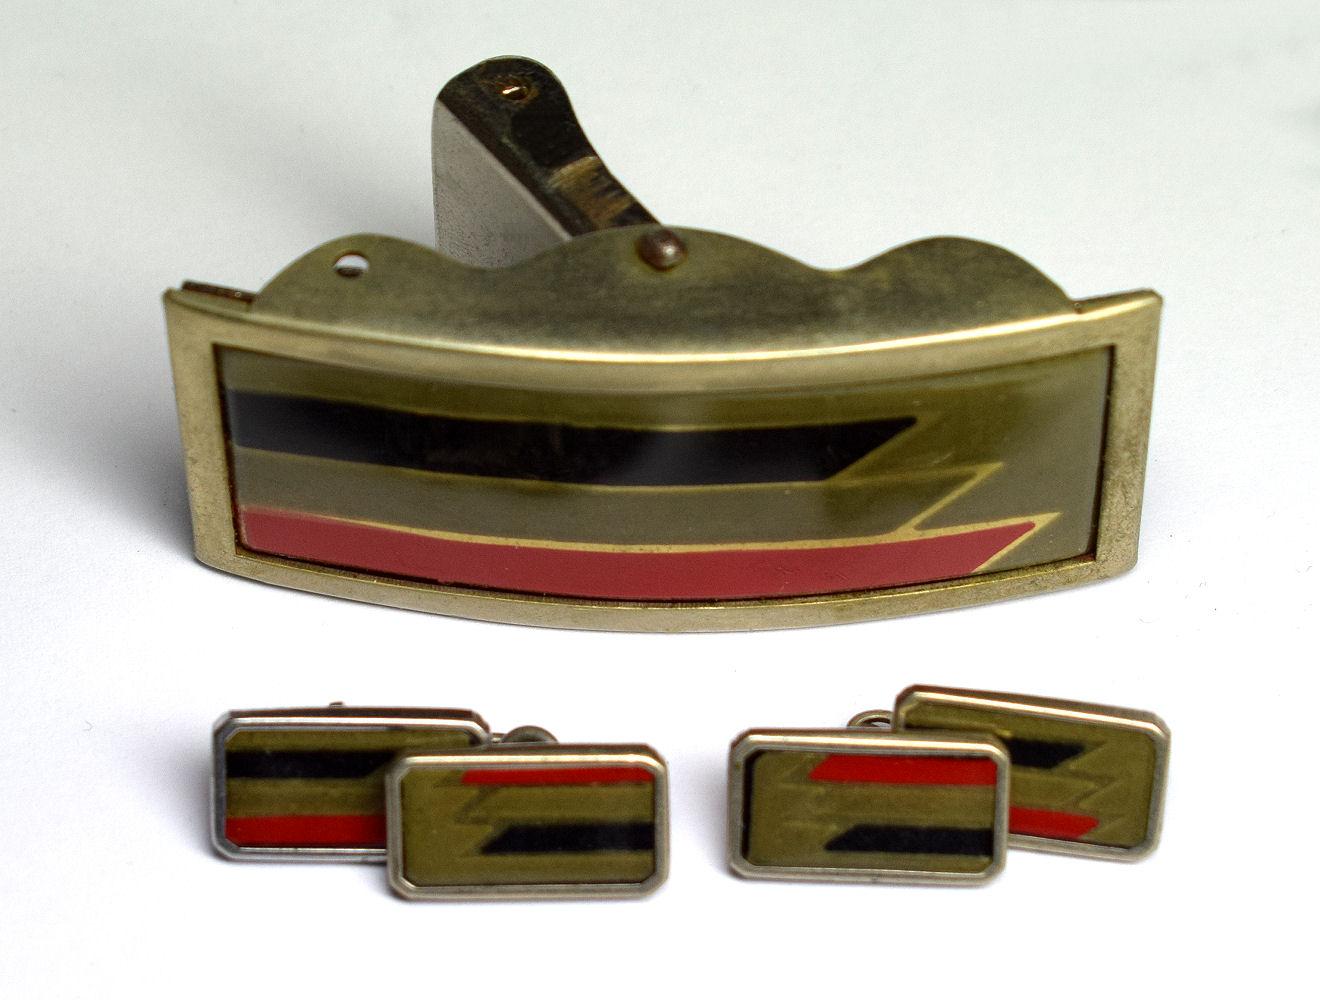 Fabulous pair of matching 1930s Art Deco men’s cufflinks with a great geometric pattern and matching buckle. Silver toned metal with tri-color enamel decoration. Condition is very good with just some minor ware to the metal work.